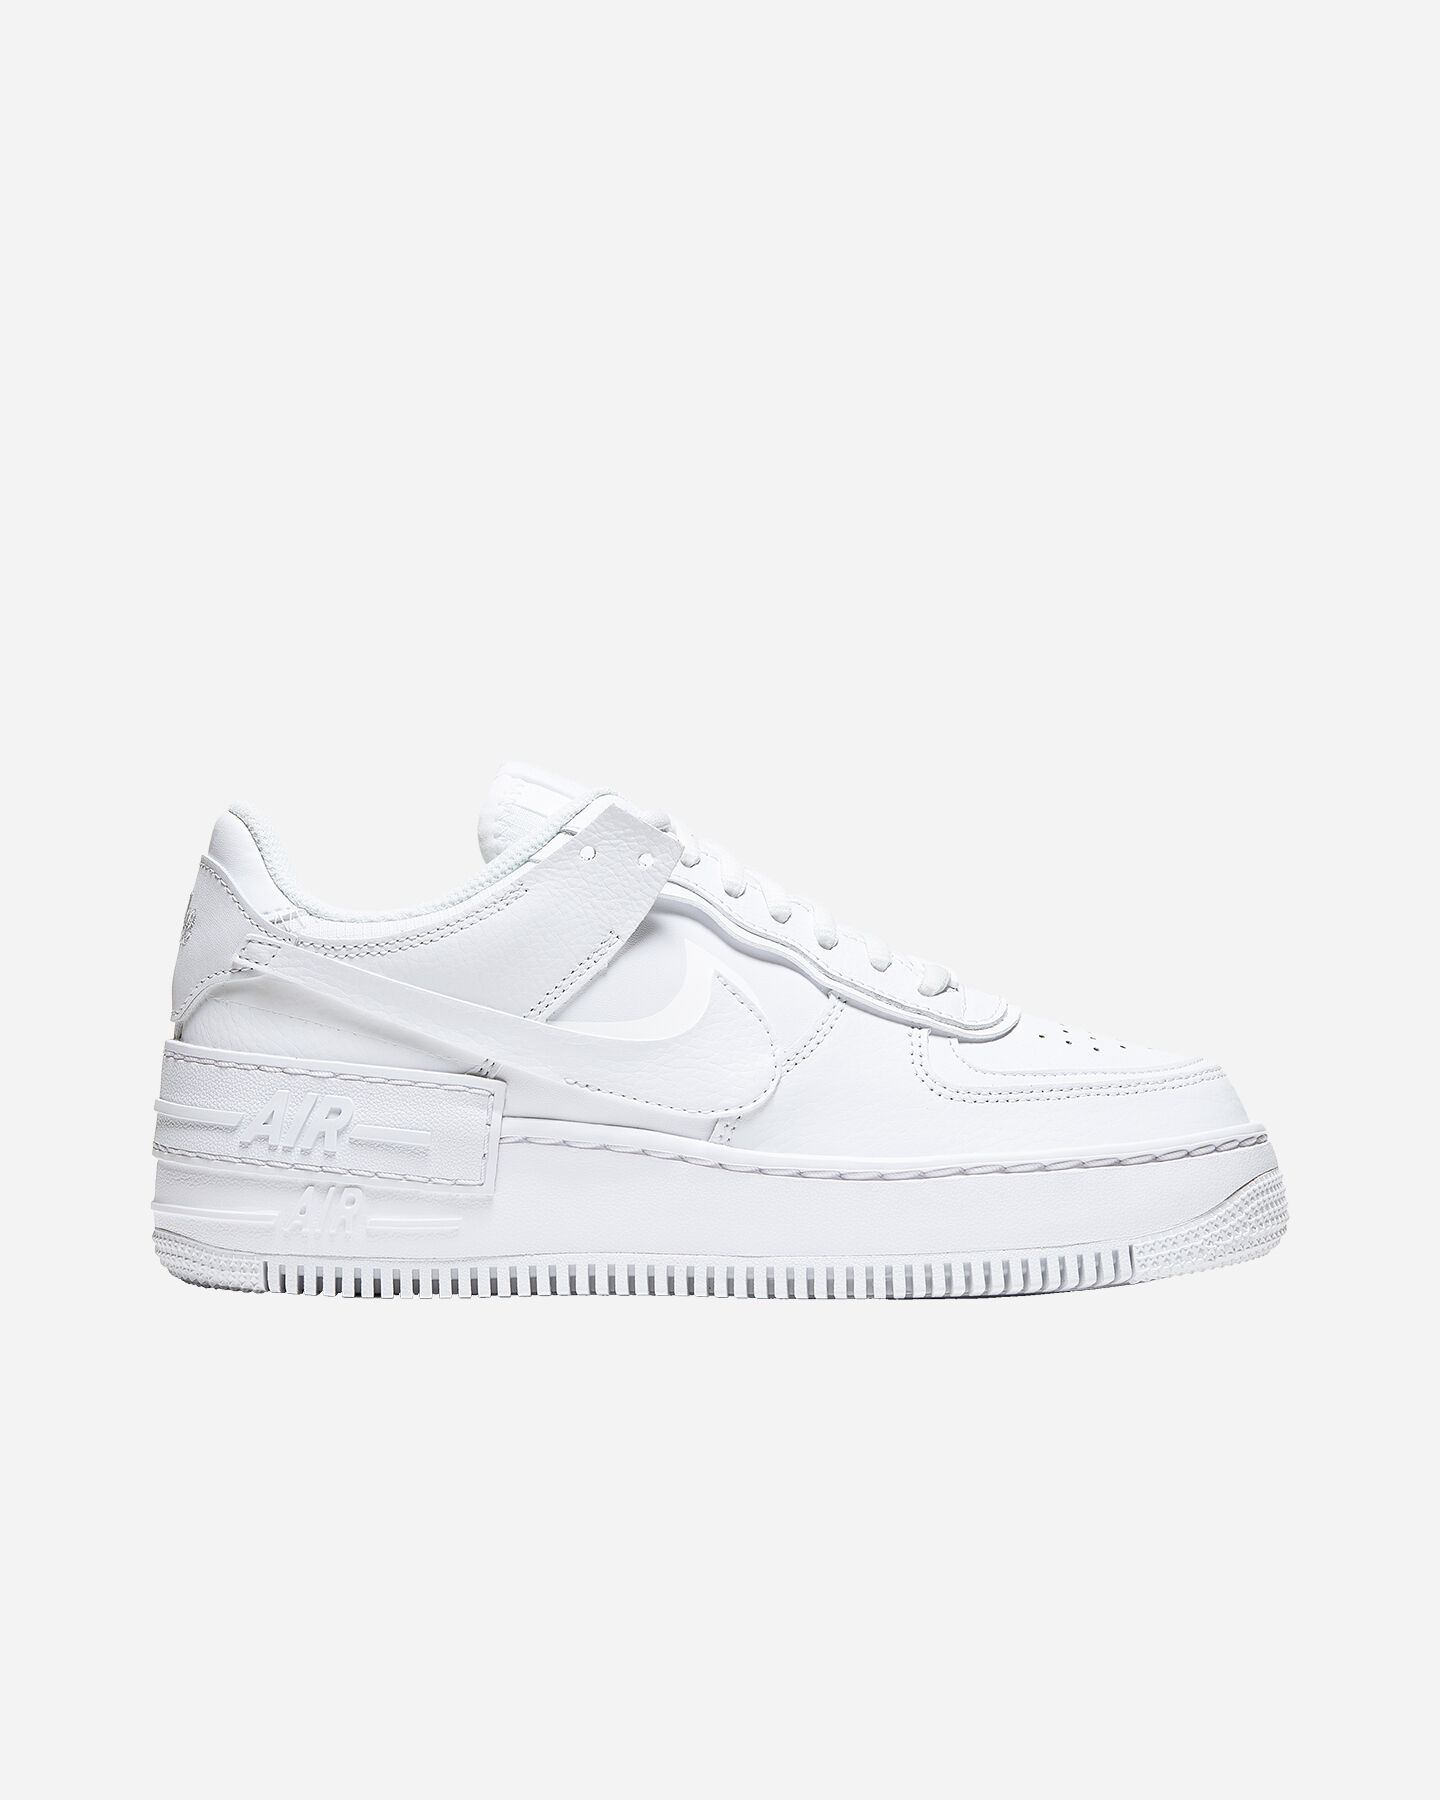 champs air force 1 shadow